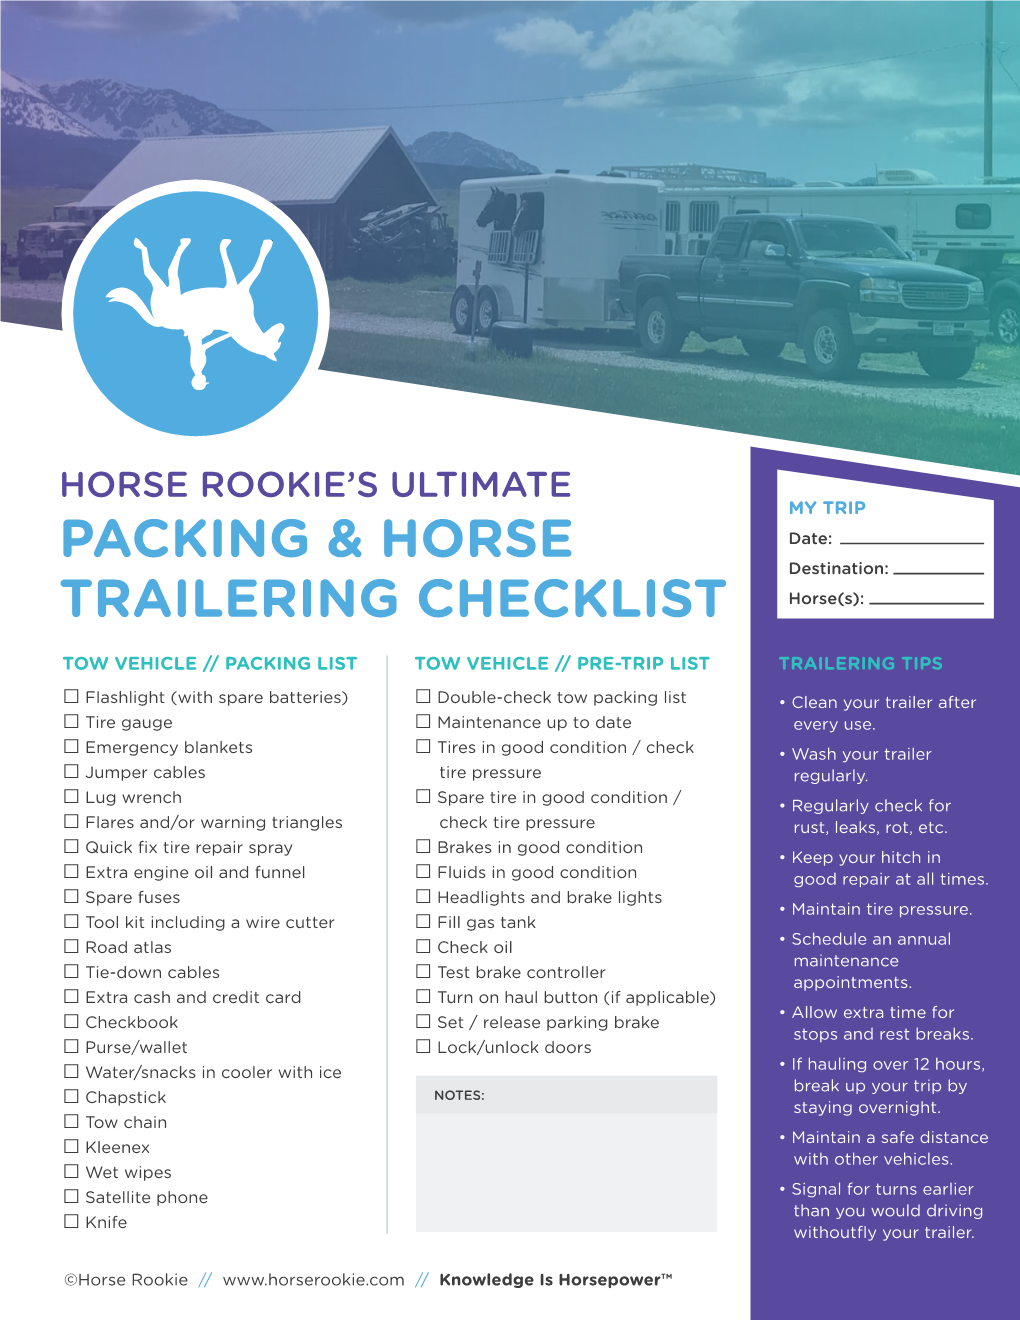 Packing & Horse Trailering Checklist